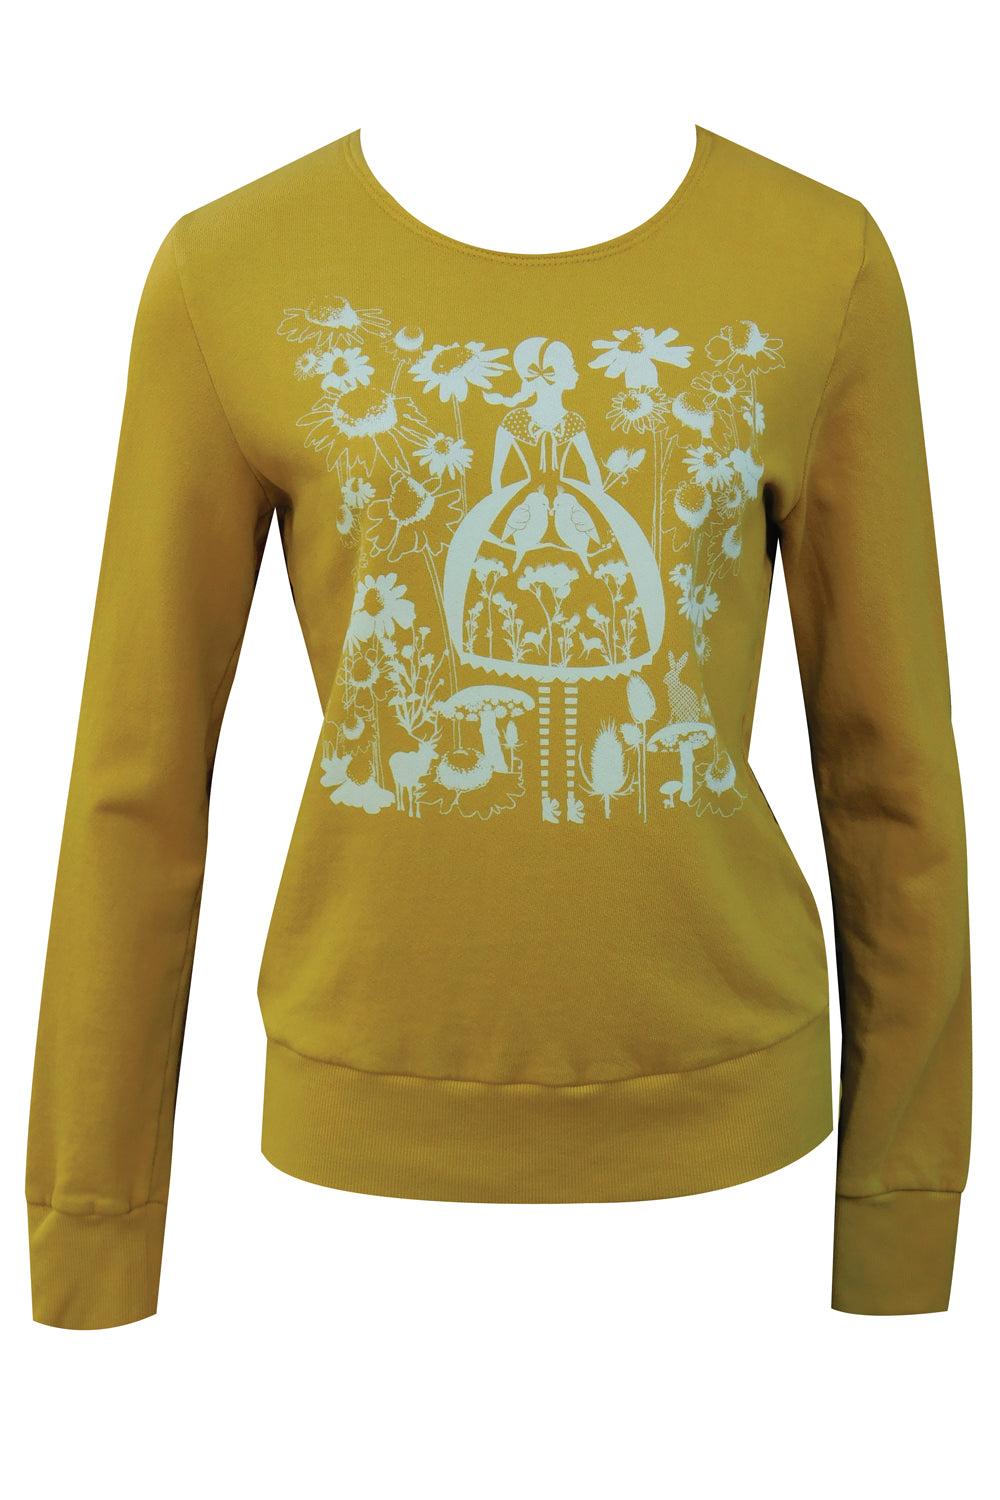 Yellow sweatshirt with white screen print of cute girl surrounded by flora and fauna